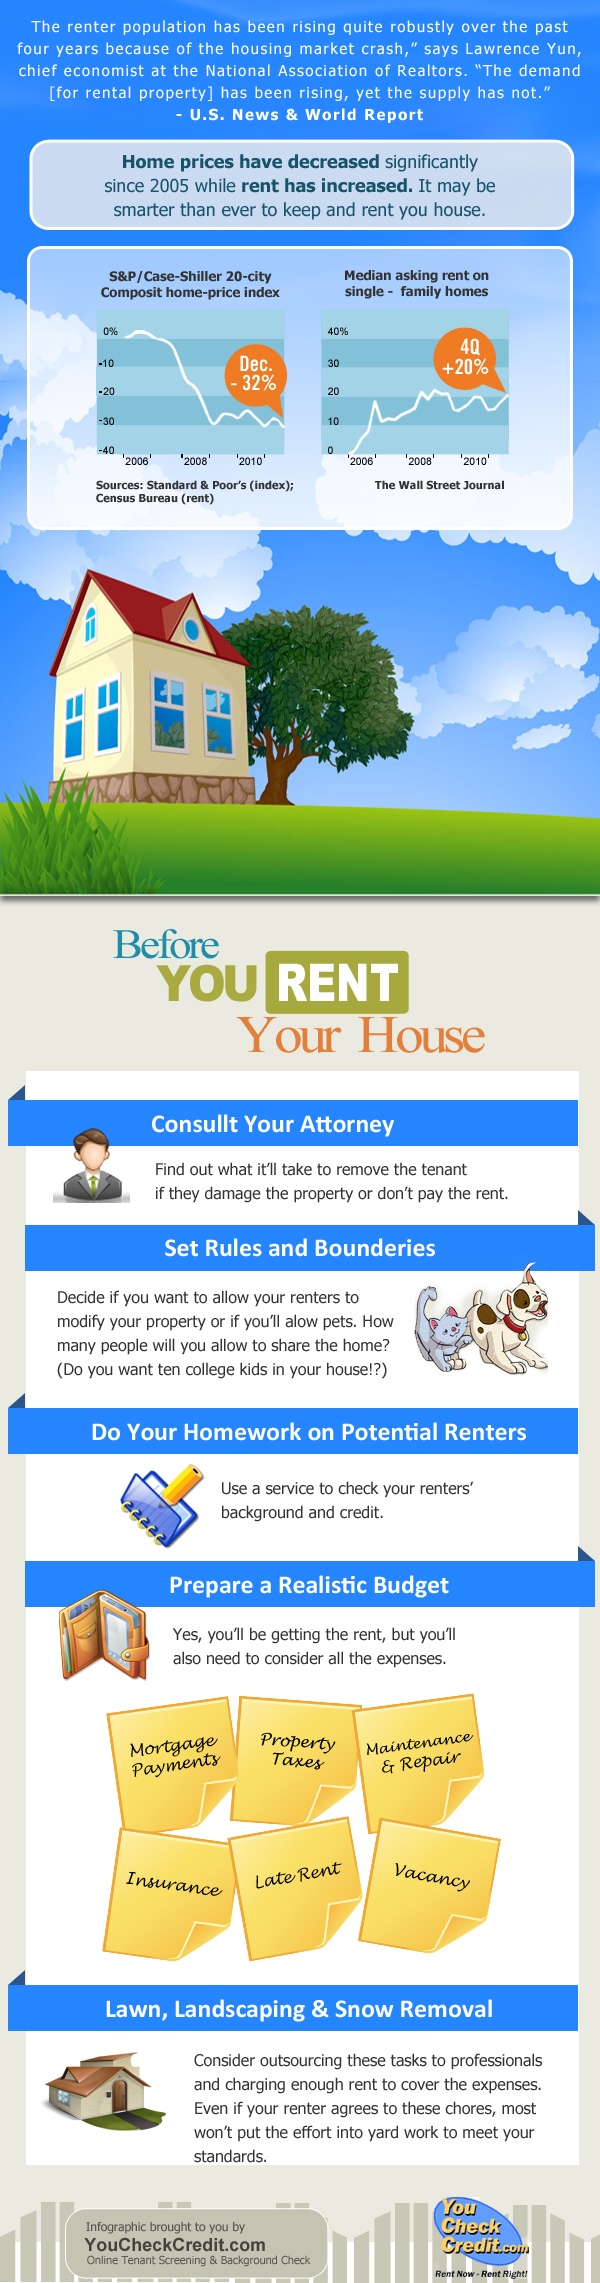 Tips for Renting Property - Before You Rent Your House Infographic